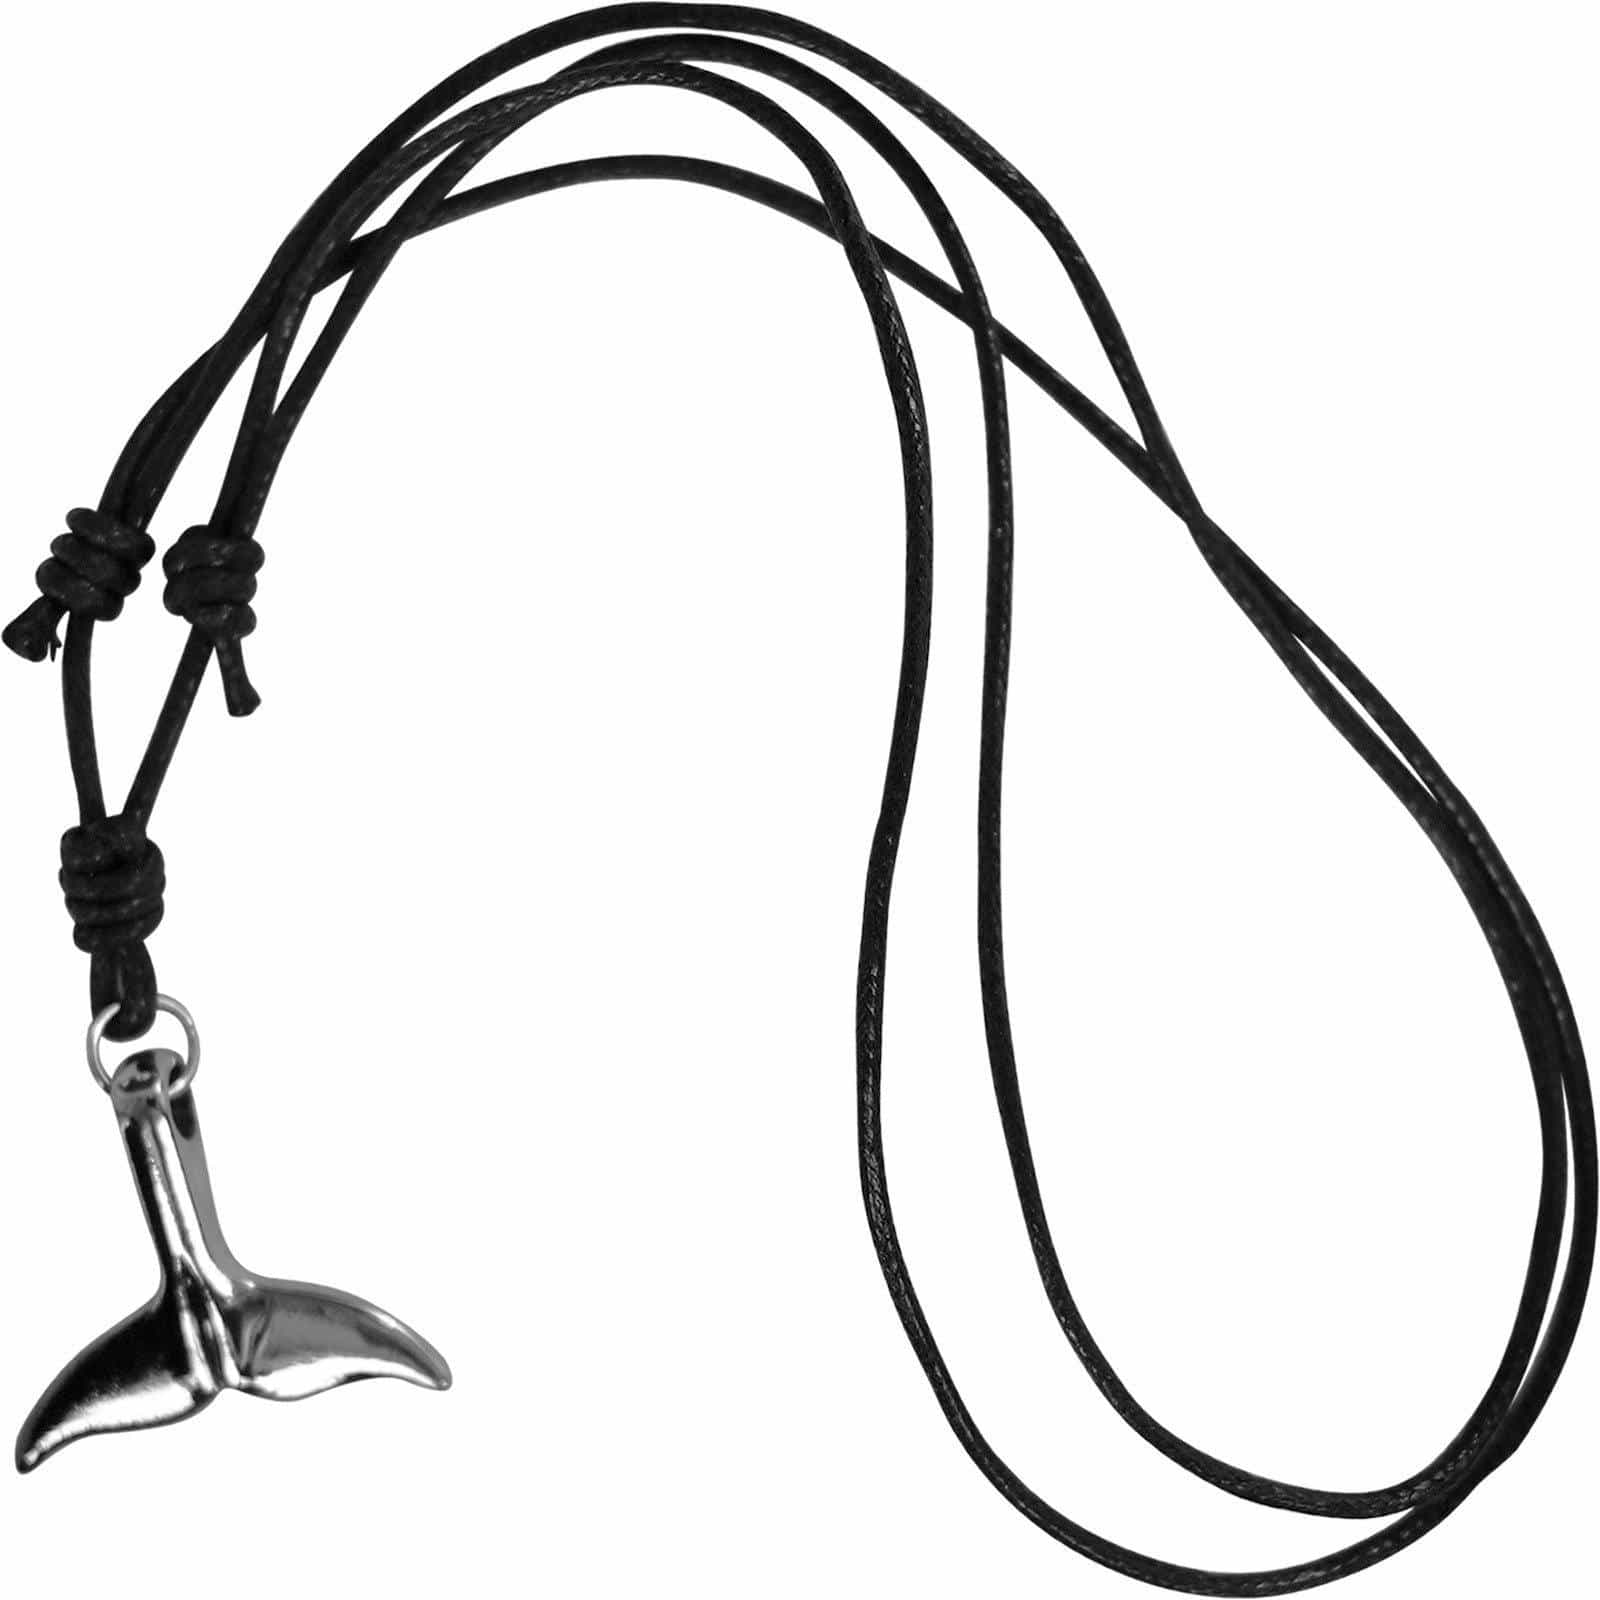 Metal Dolphin Whale Mermaid Tail Pendant Chain Necklace Mens Womens Girls Boys